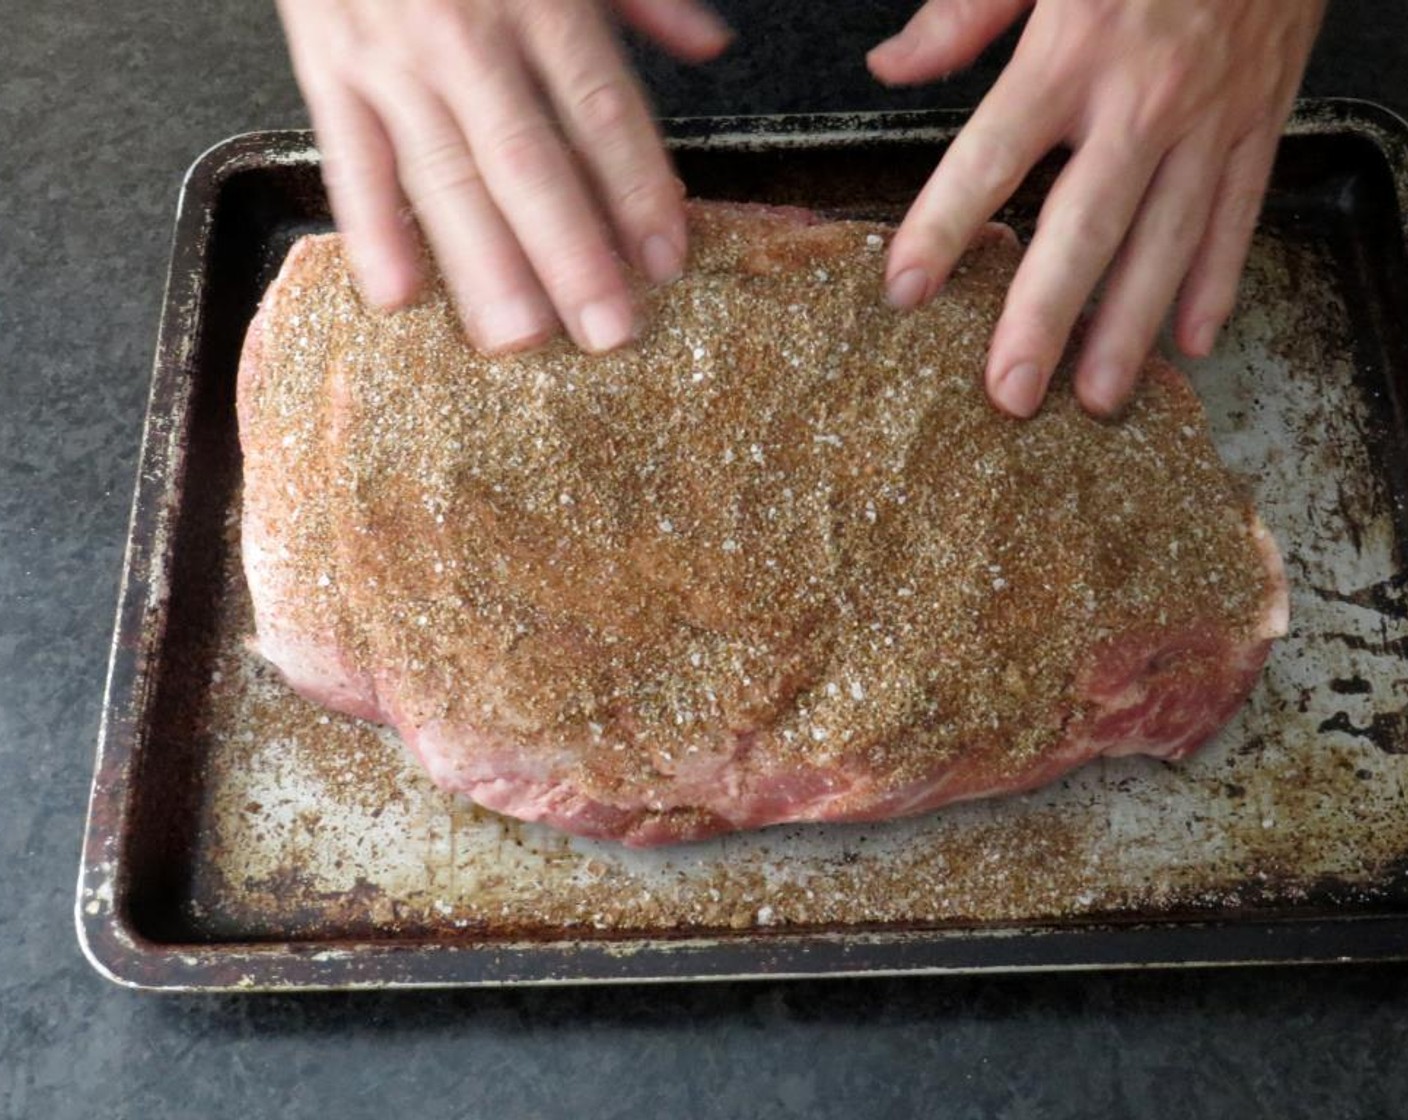 step 3 Sprinkle the Pork Shoulder (5 lb) liberally on all sides with rub, pat and rub it in with your fingers. Place on a rimmed baking sheet and cover with plastic wrap. Refrigerate overnight. Soak 4 cups of hickory wood chips in water.